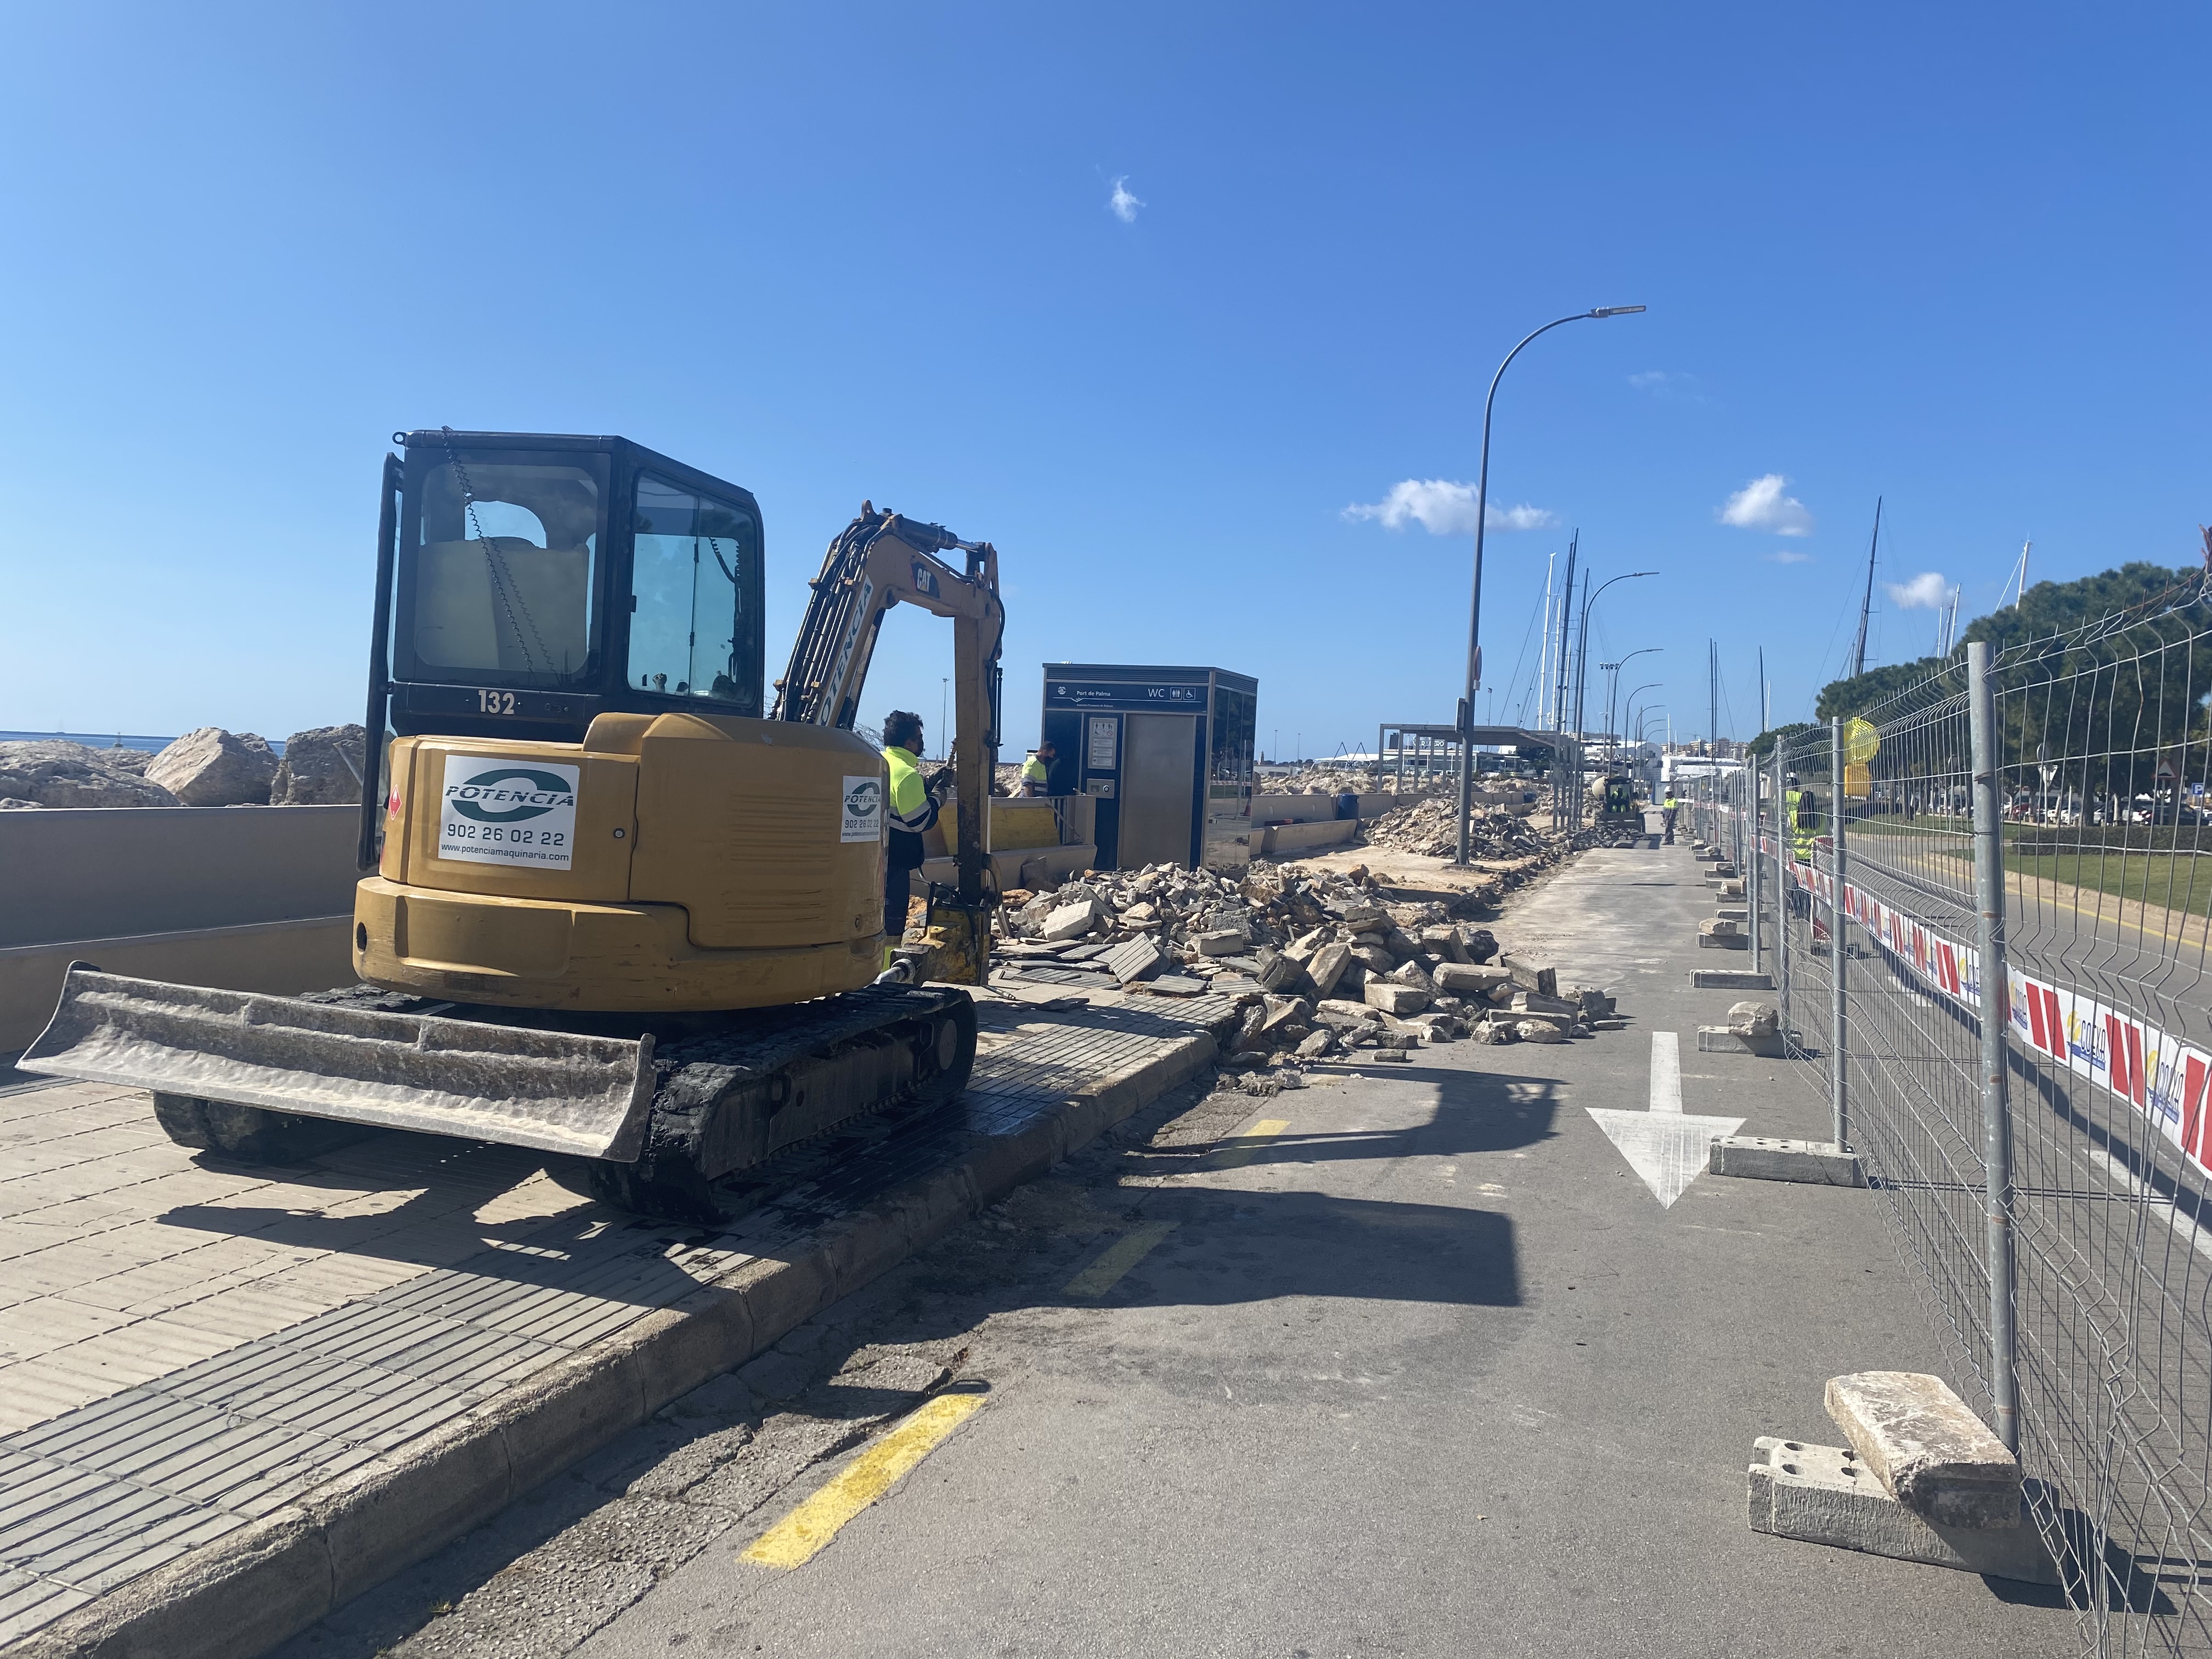 The APB improves the pavement surface of the Camí de s’Escullera